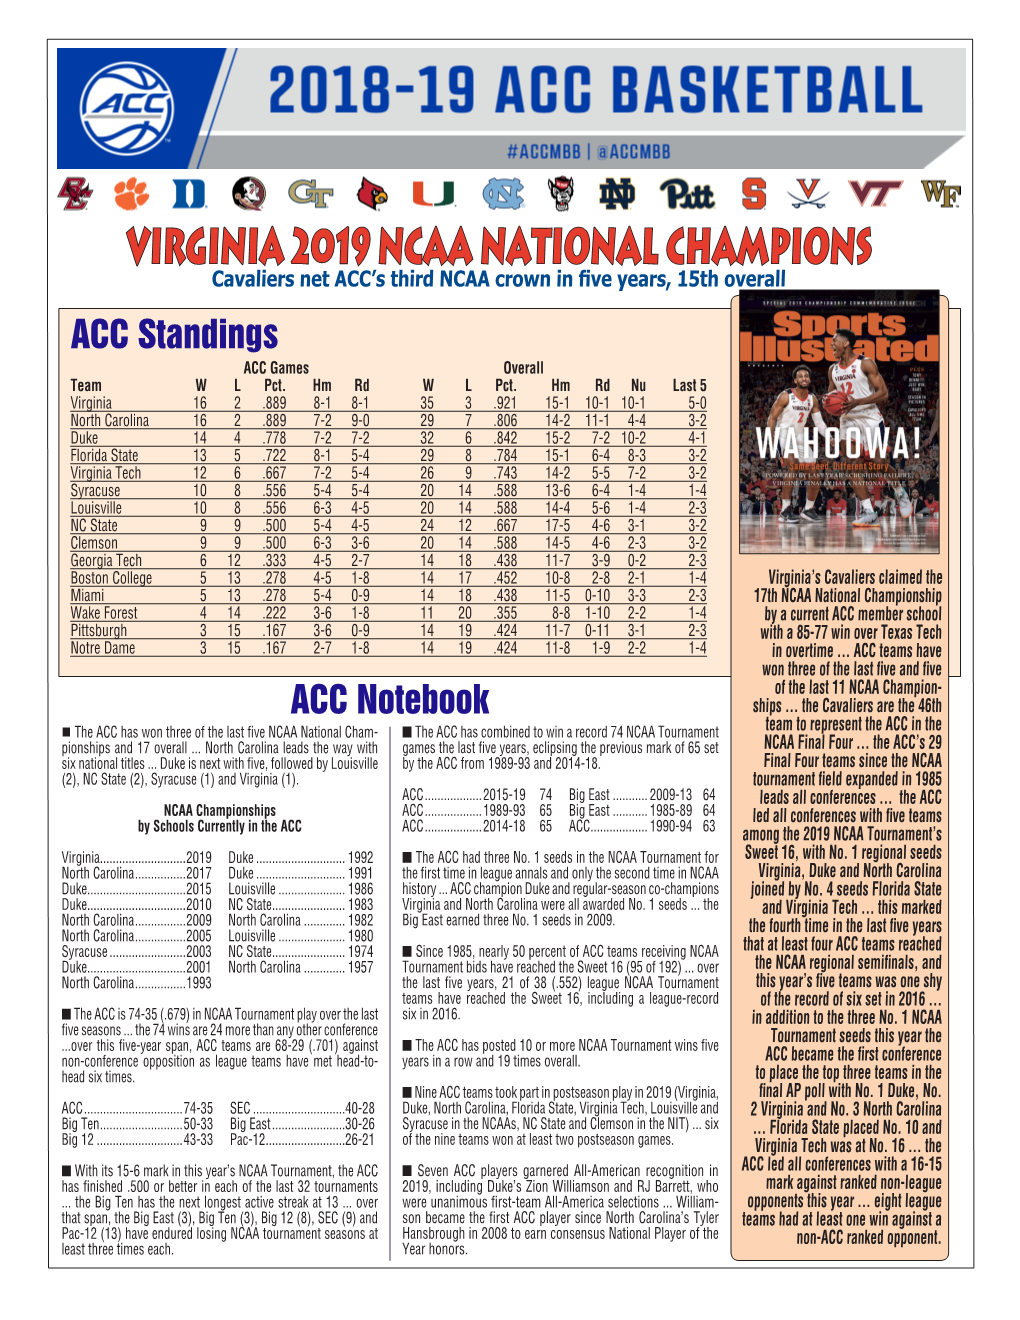 Virginia 2019 NCAA National Champions Cavaliers Net ACC’S Third NCAA Crown in Five Years, 15Th Overall ACC Standings Accolades ACC Games Overall Team W L Pct